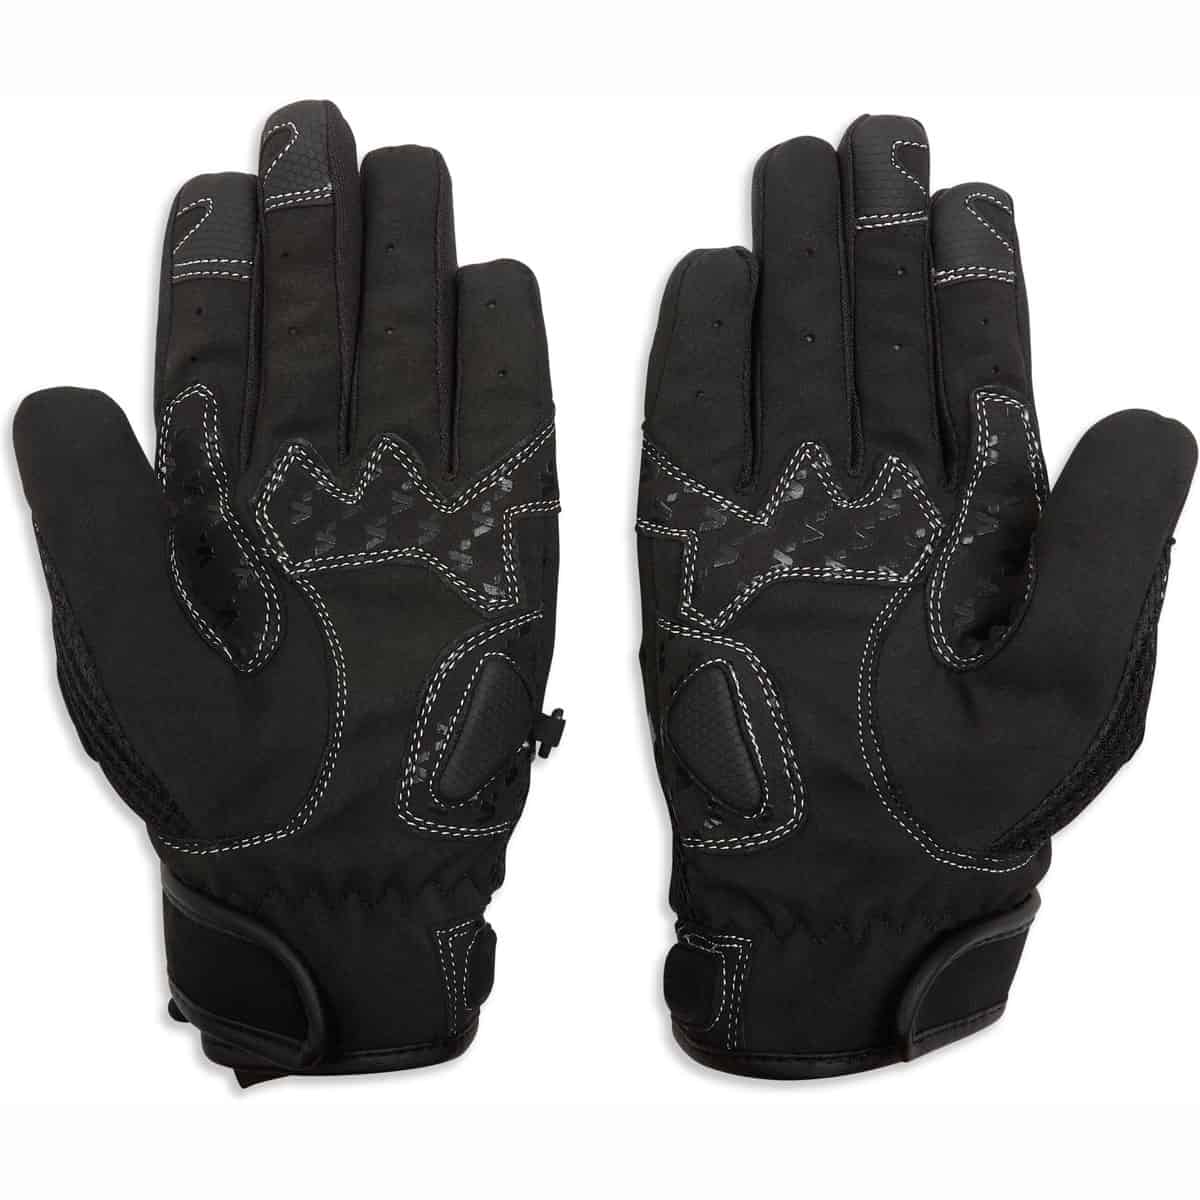 The Spada MX-Air CE Gloves are specially designed to keep your hands protected while you're out riding.